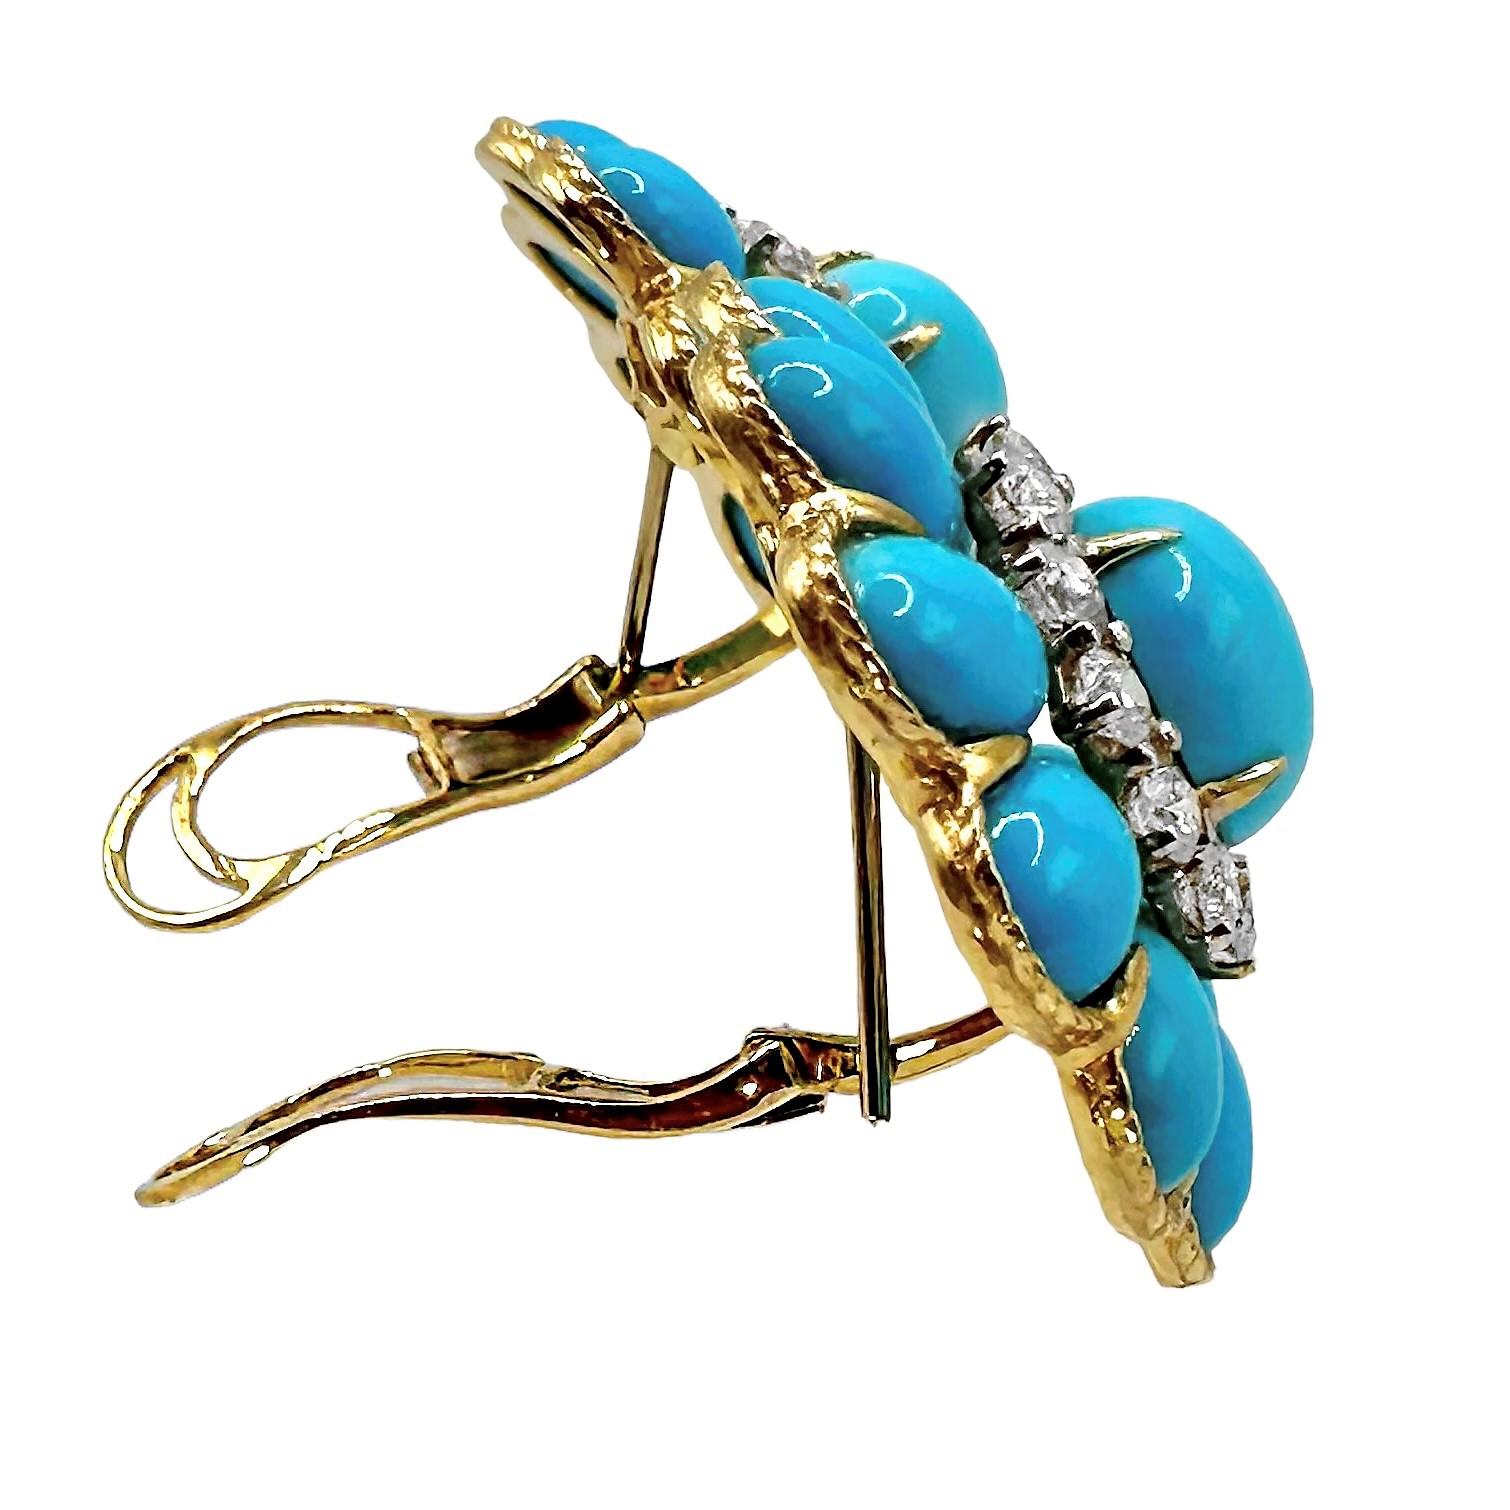 Brilliant Cut Striking 18K Yellow Gold Vintage Turquoise and Diamond Earrings For Sale